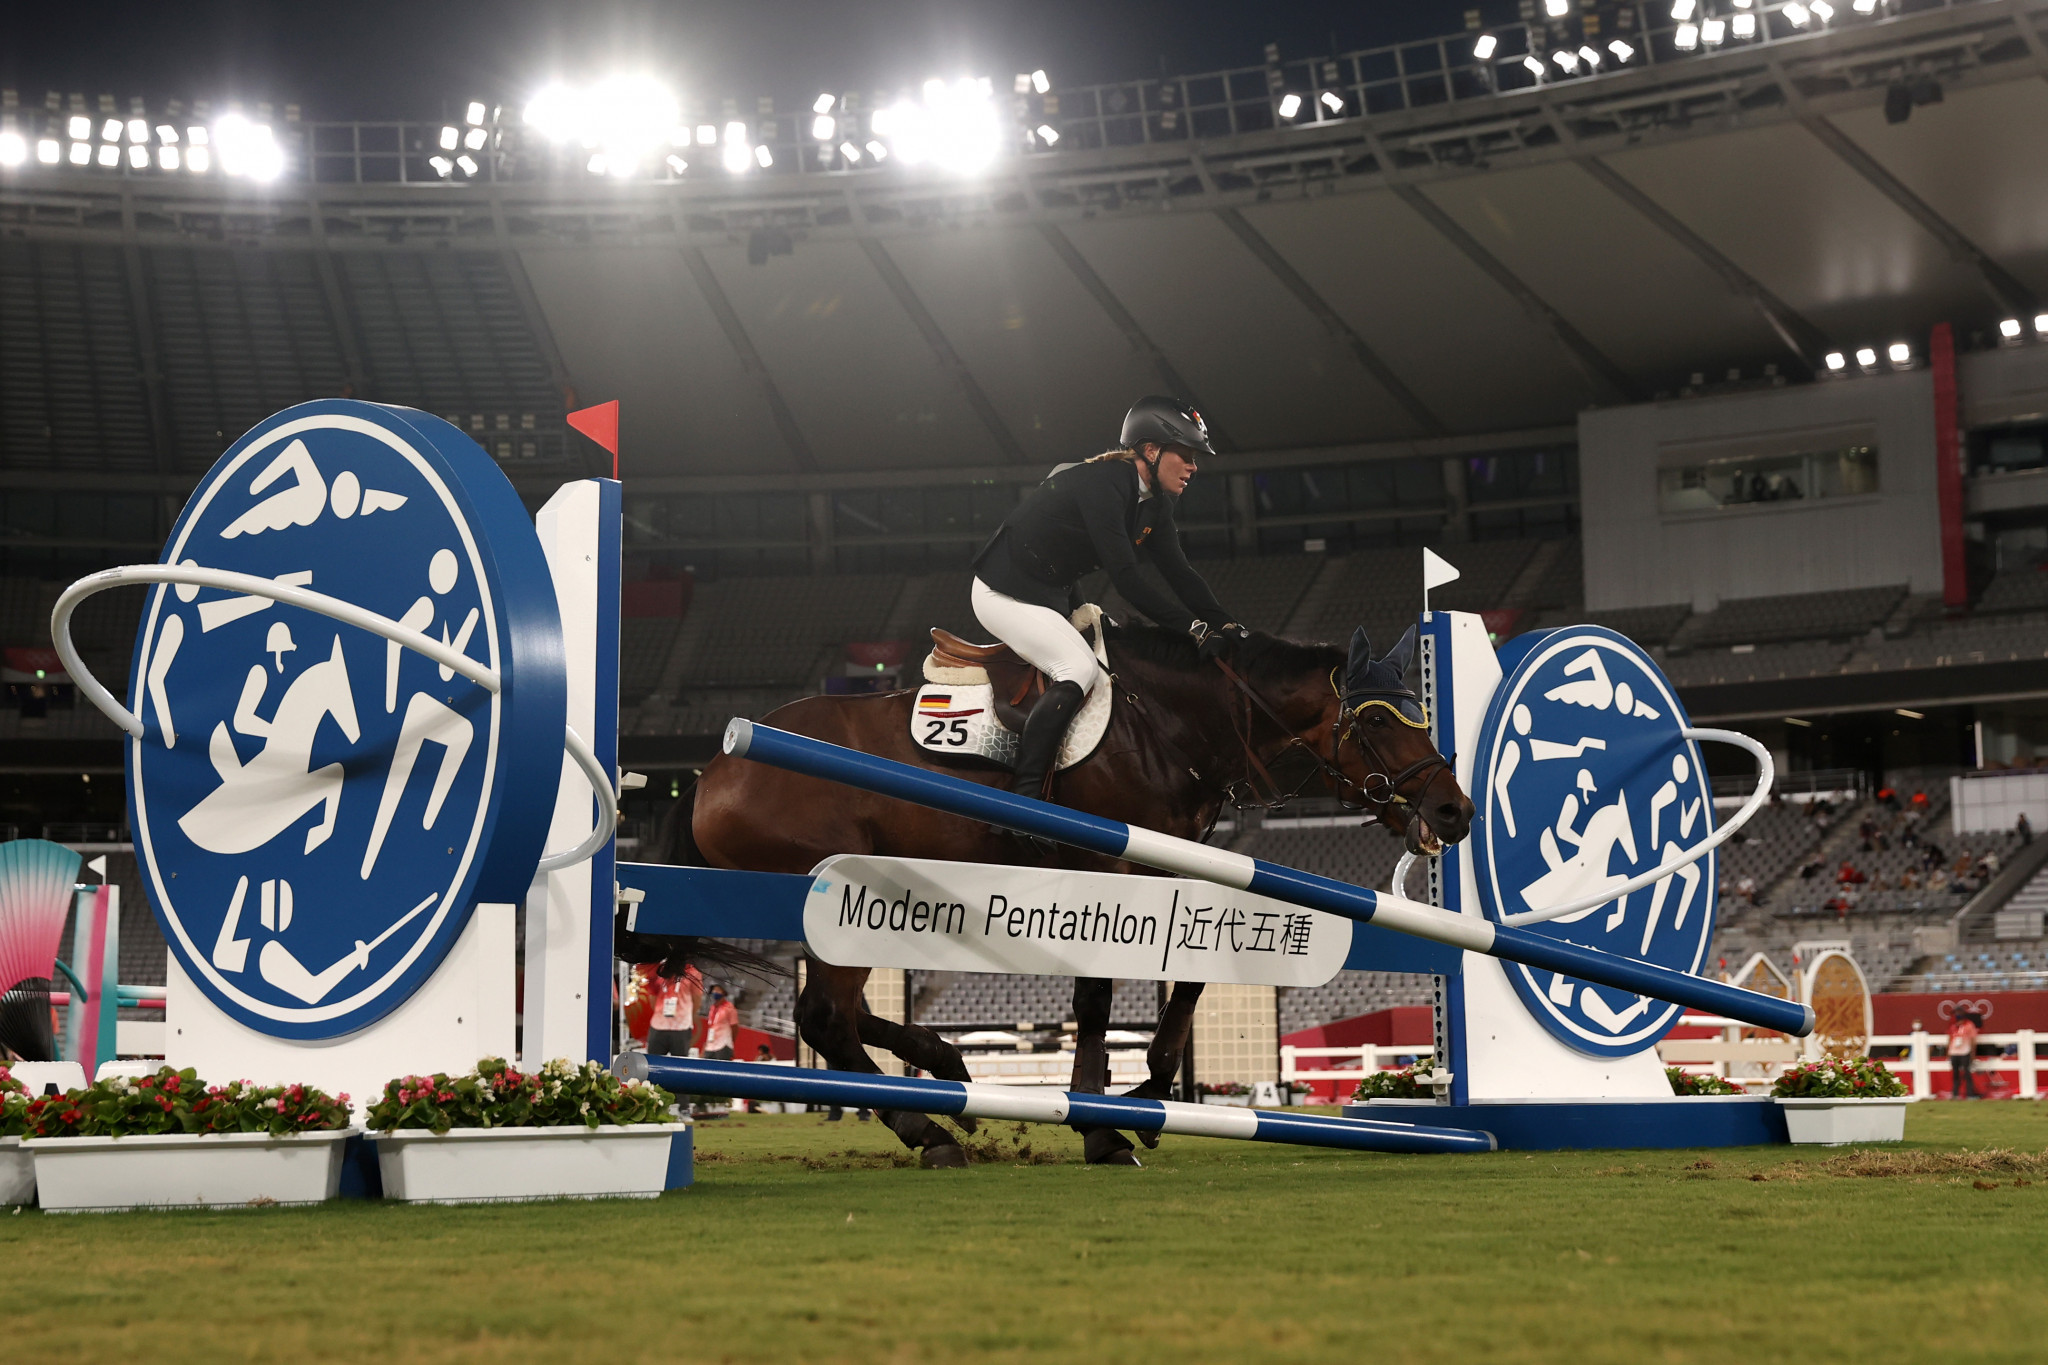 Saint-Boy refused to jump for then competition leader Annika Schleu at the Tokyo 2020 Olympics ©Getty Images